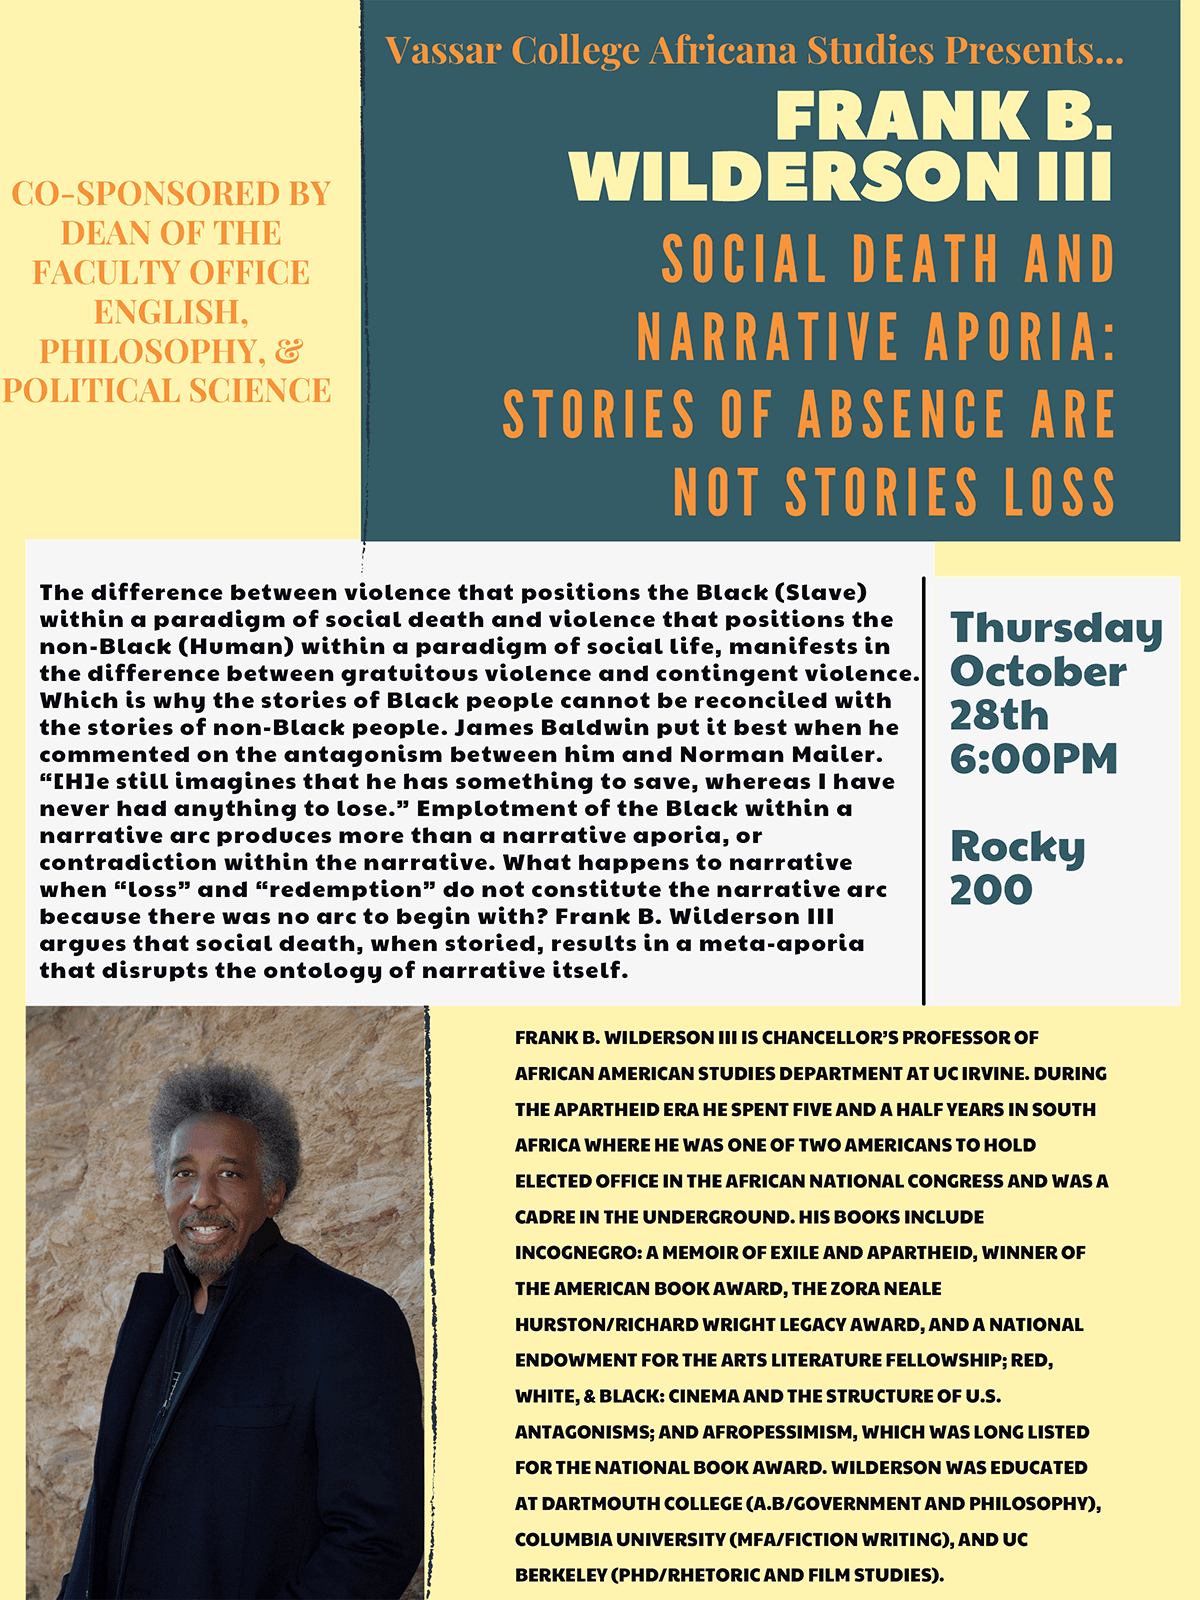 Frank B. Wilderson III: “Social Death and Narrative Aporia: Stories of Absence are not Stories Loss”. Thursday October 28th 6:00 p.m. Rocky 200.